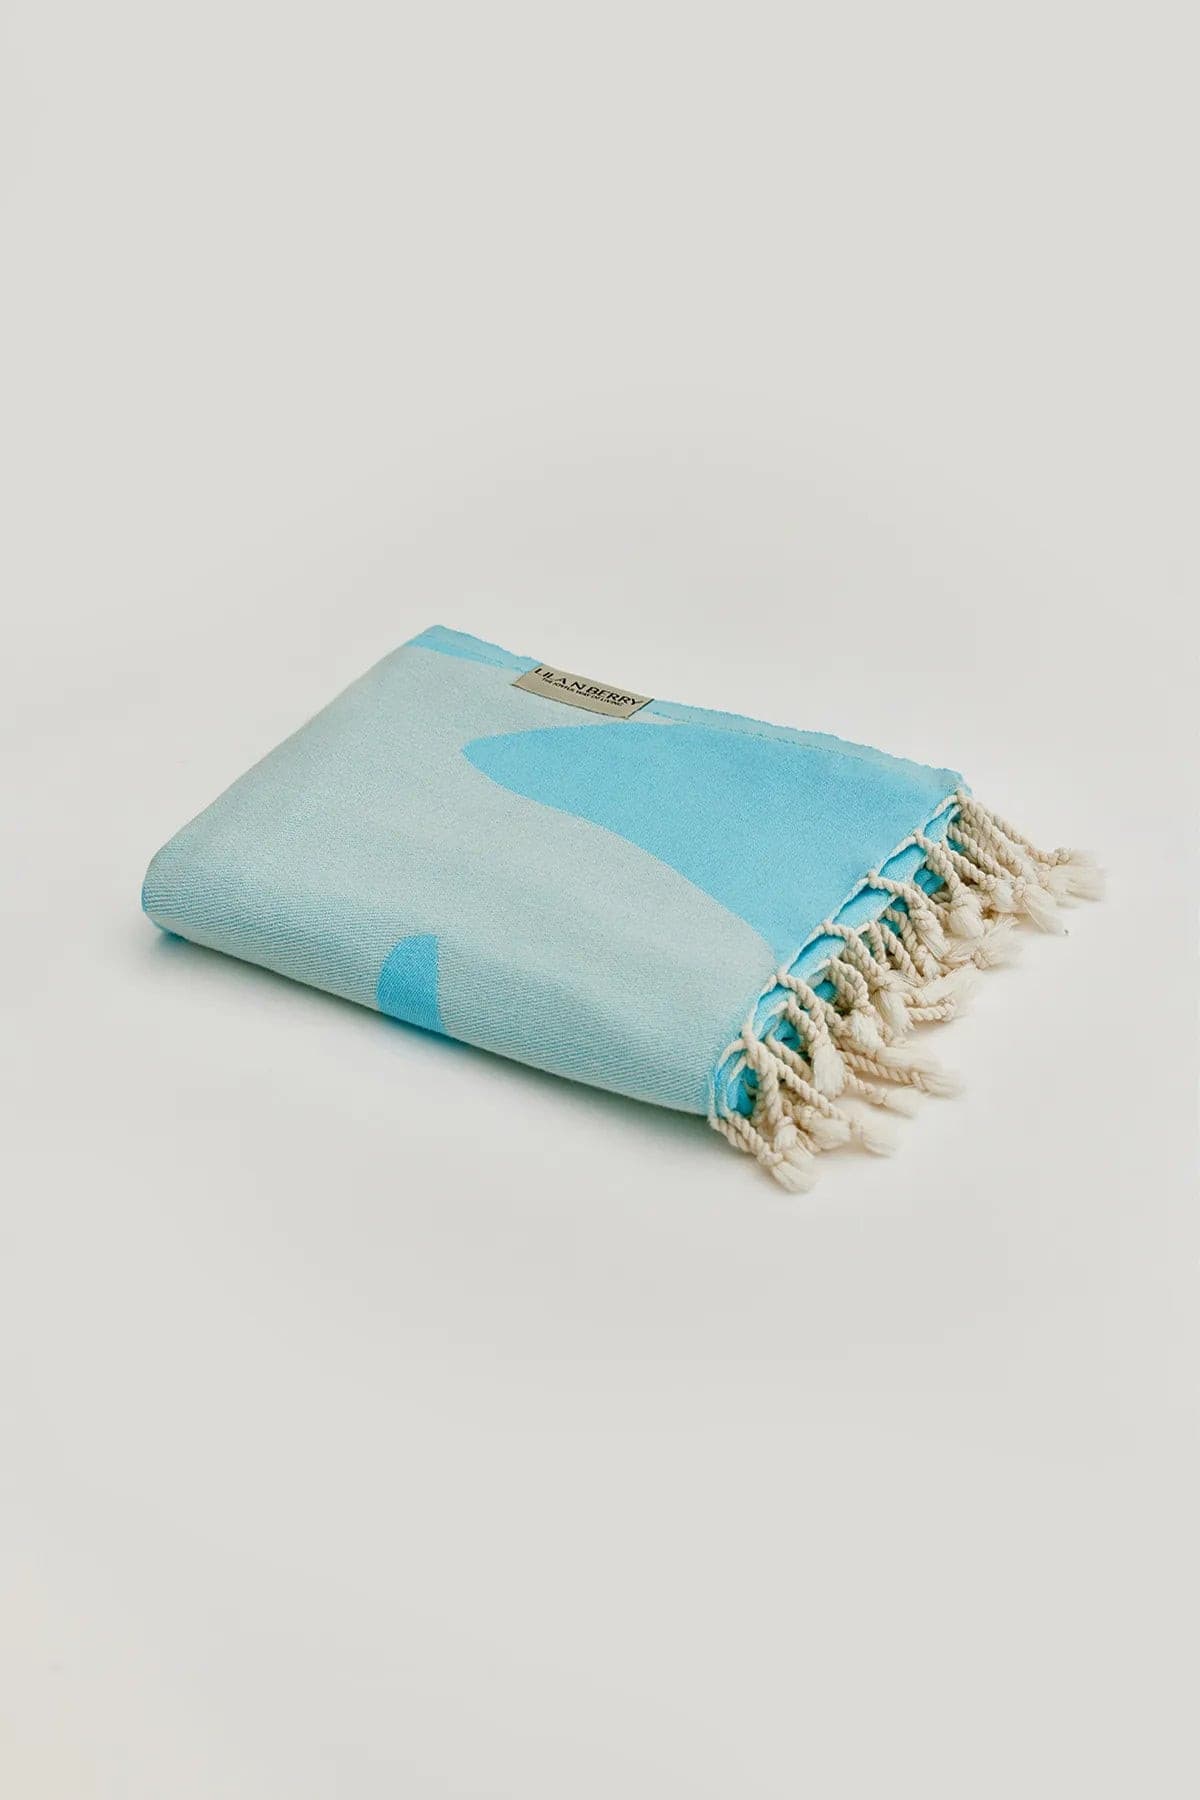 Beach/Bath,living place,Sky Blue,Turkish towel, folded,summer,line patterned,double-faces,purified sand,light,compact, easy pack,fun, recycled,double color,dimond,eastern flare,breeze,tropical forest